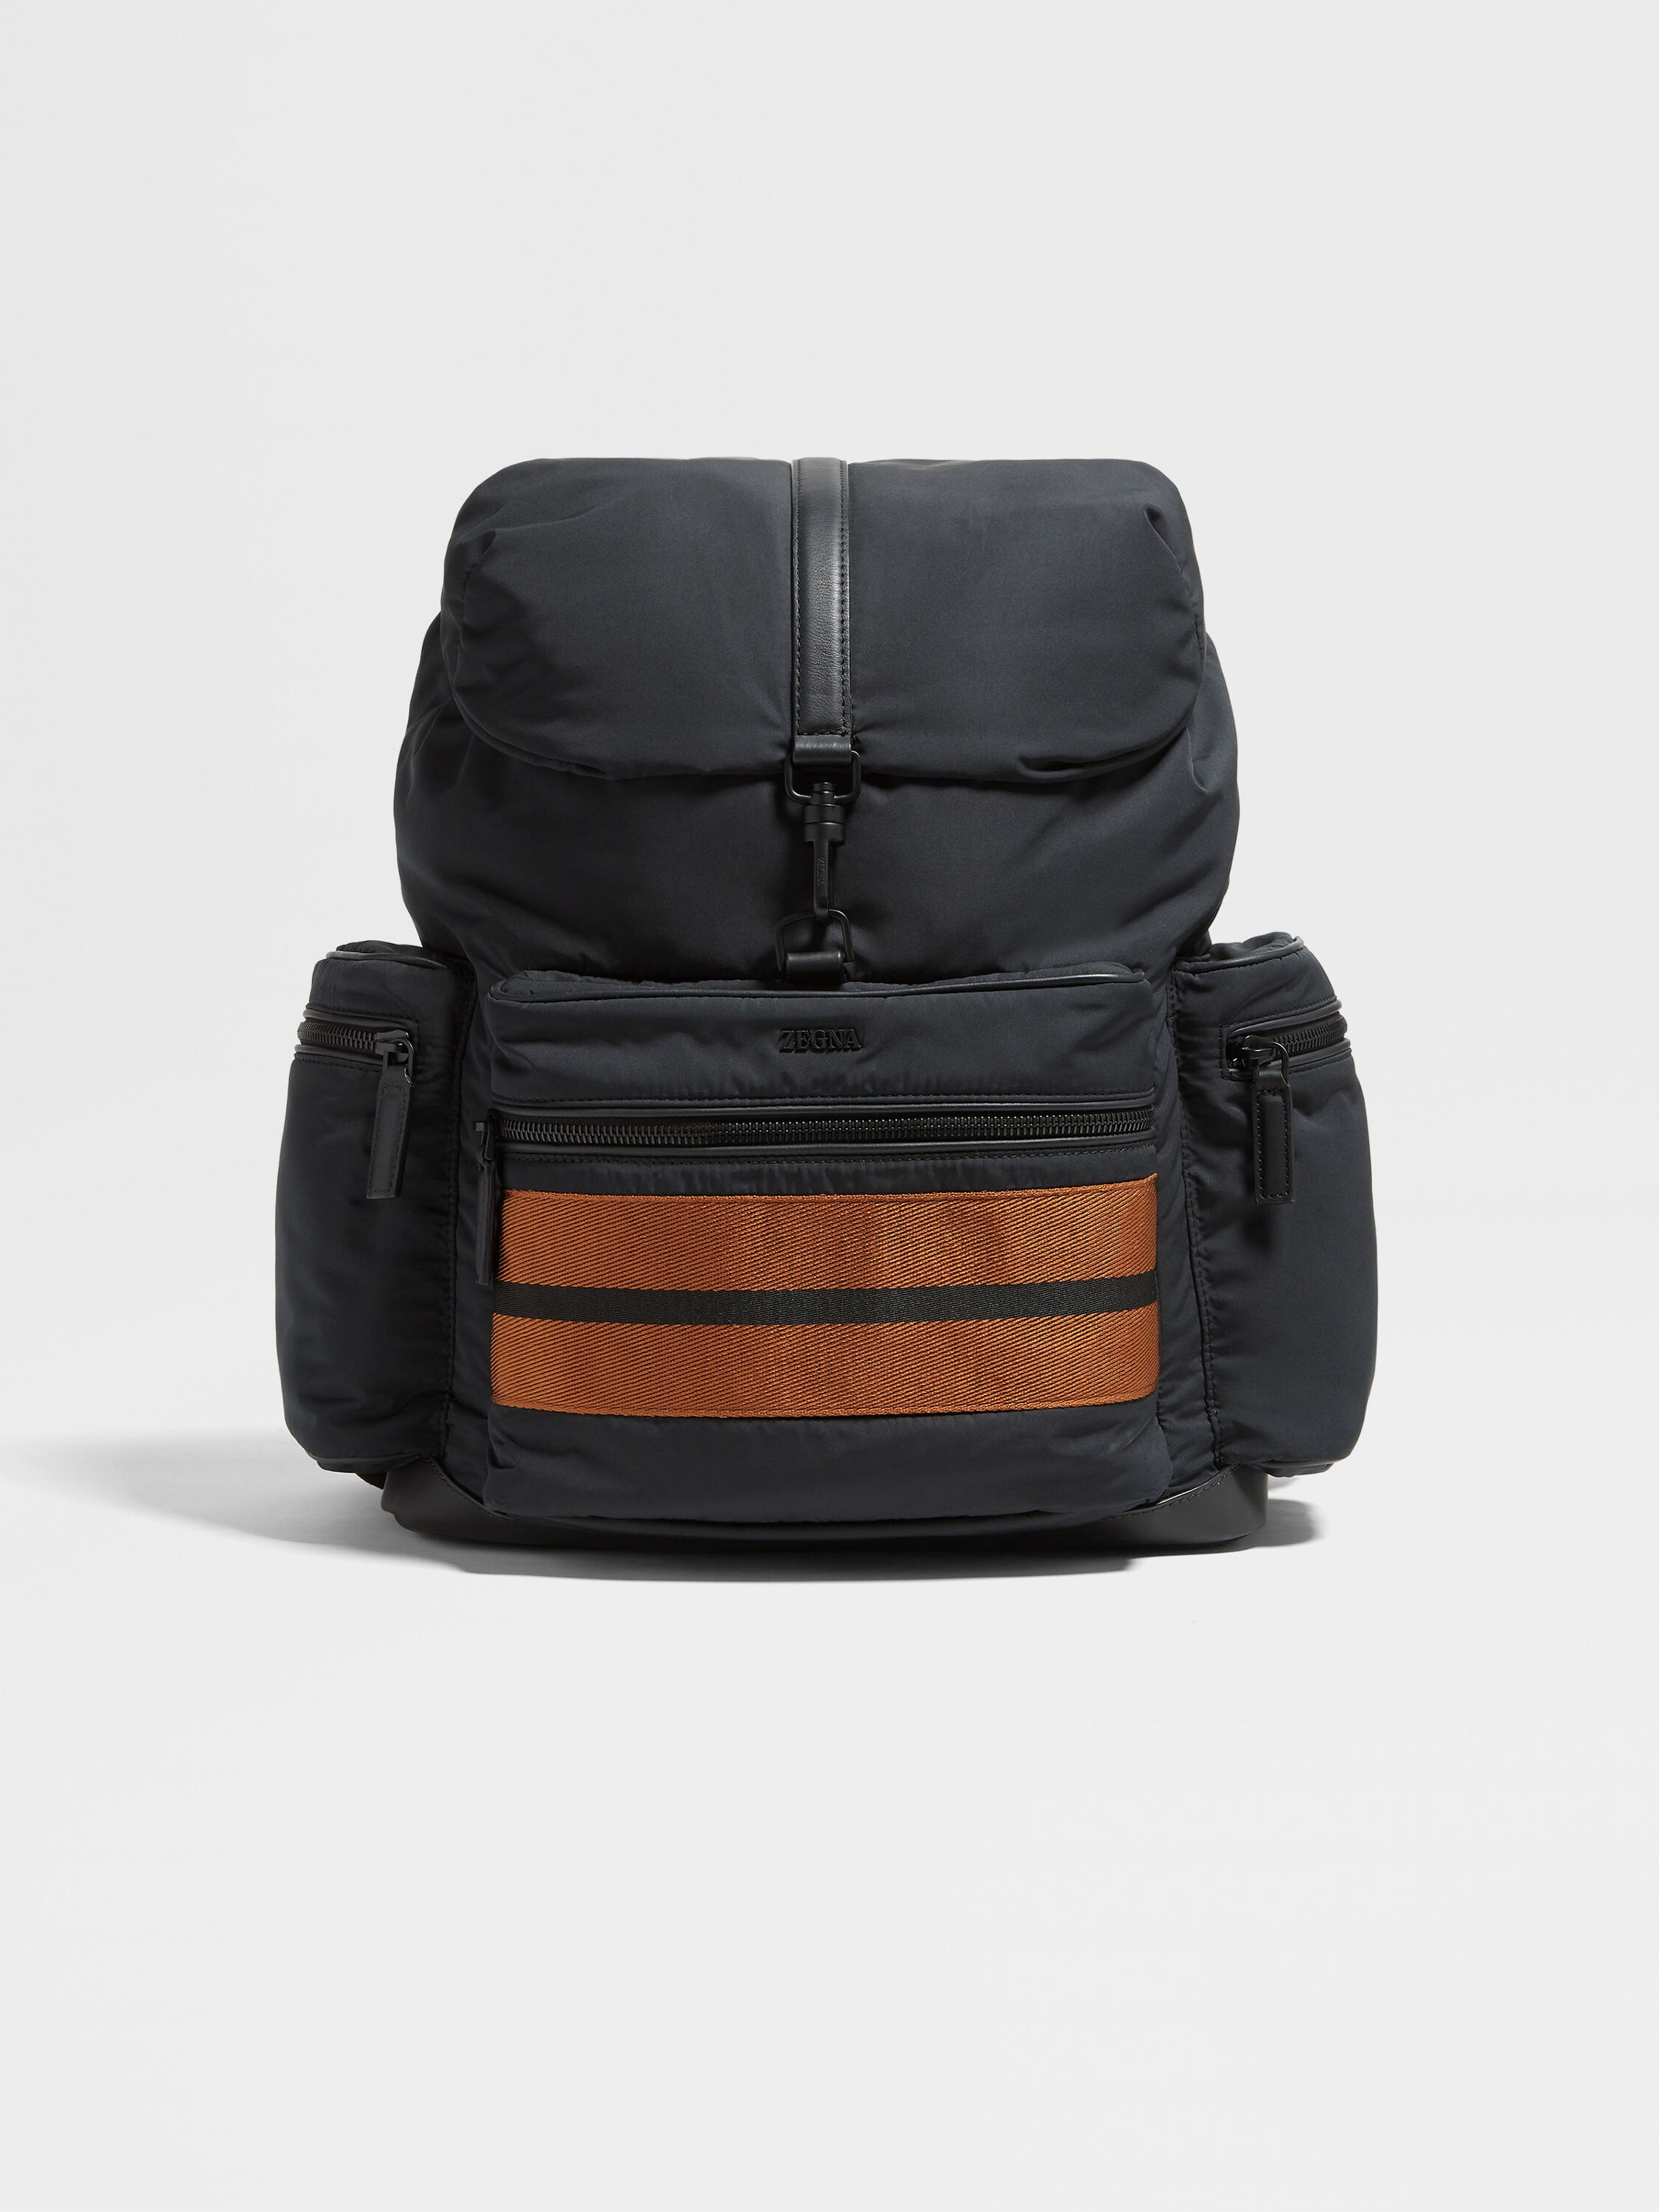 Black Technical Fabric Special Backpack